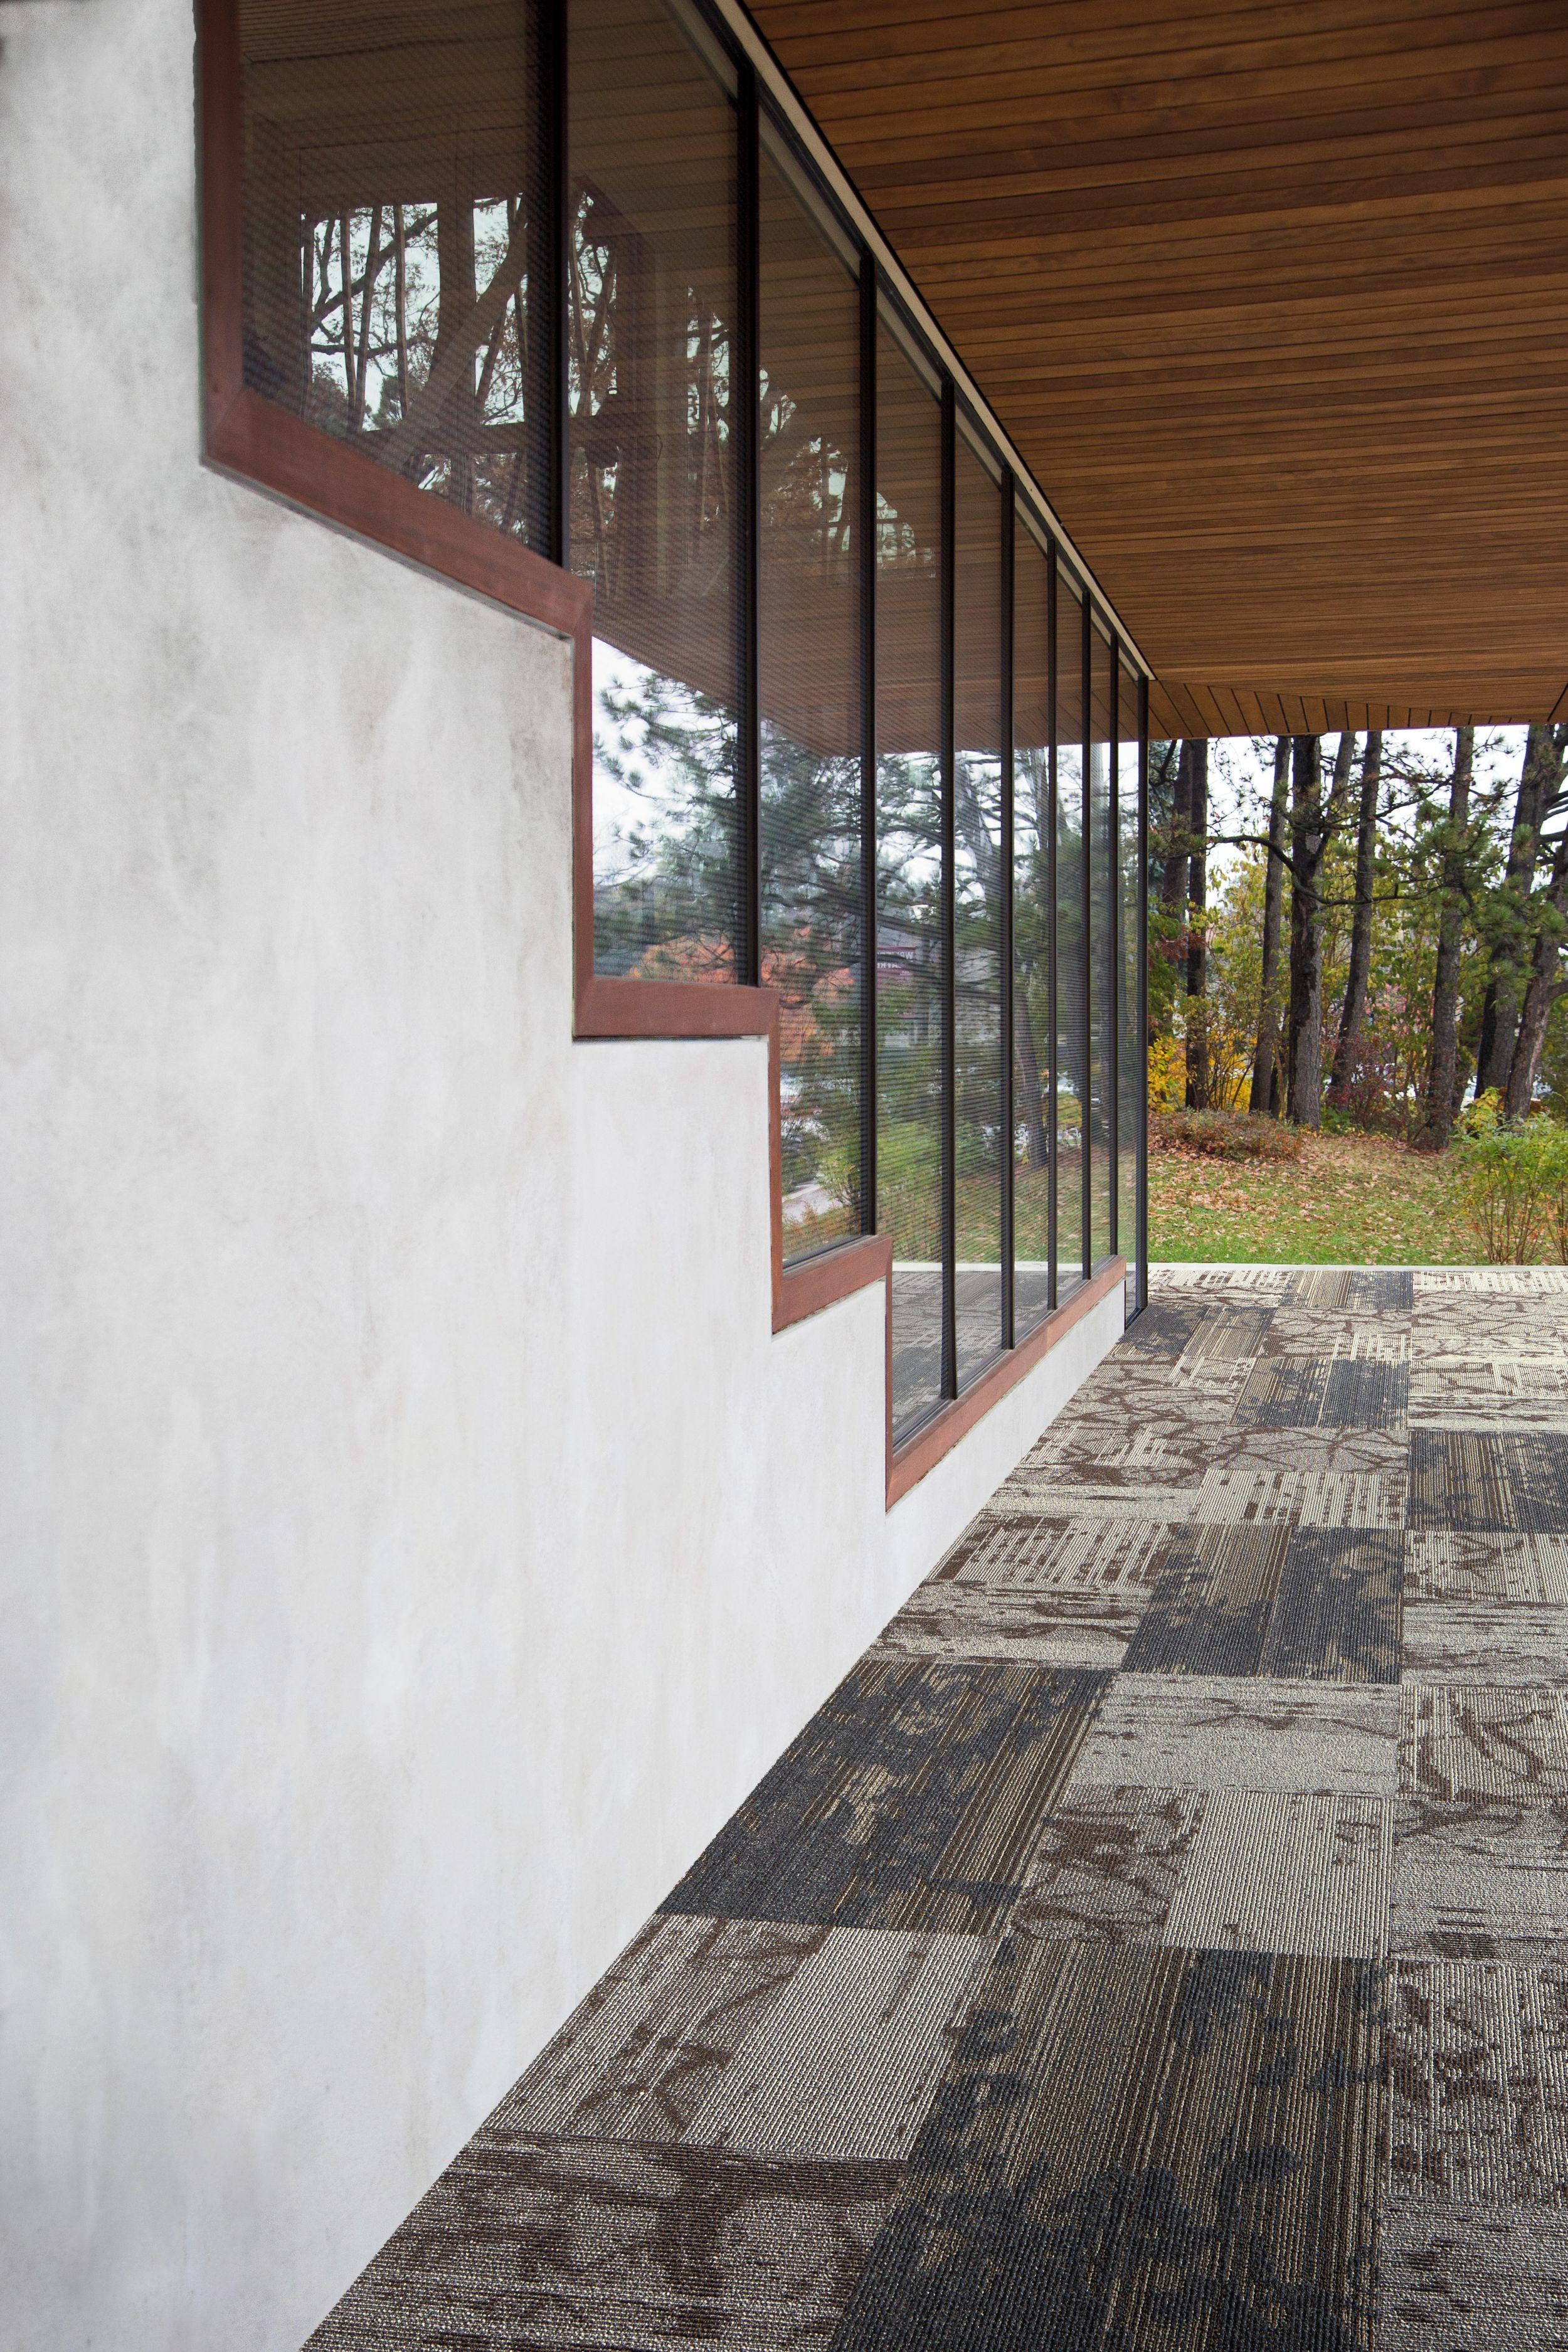 Interface Glazing and Ground plank carpet tile shown for inspiration in outdoor setting image number 15